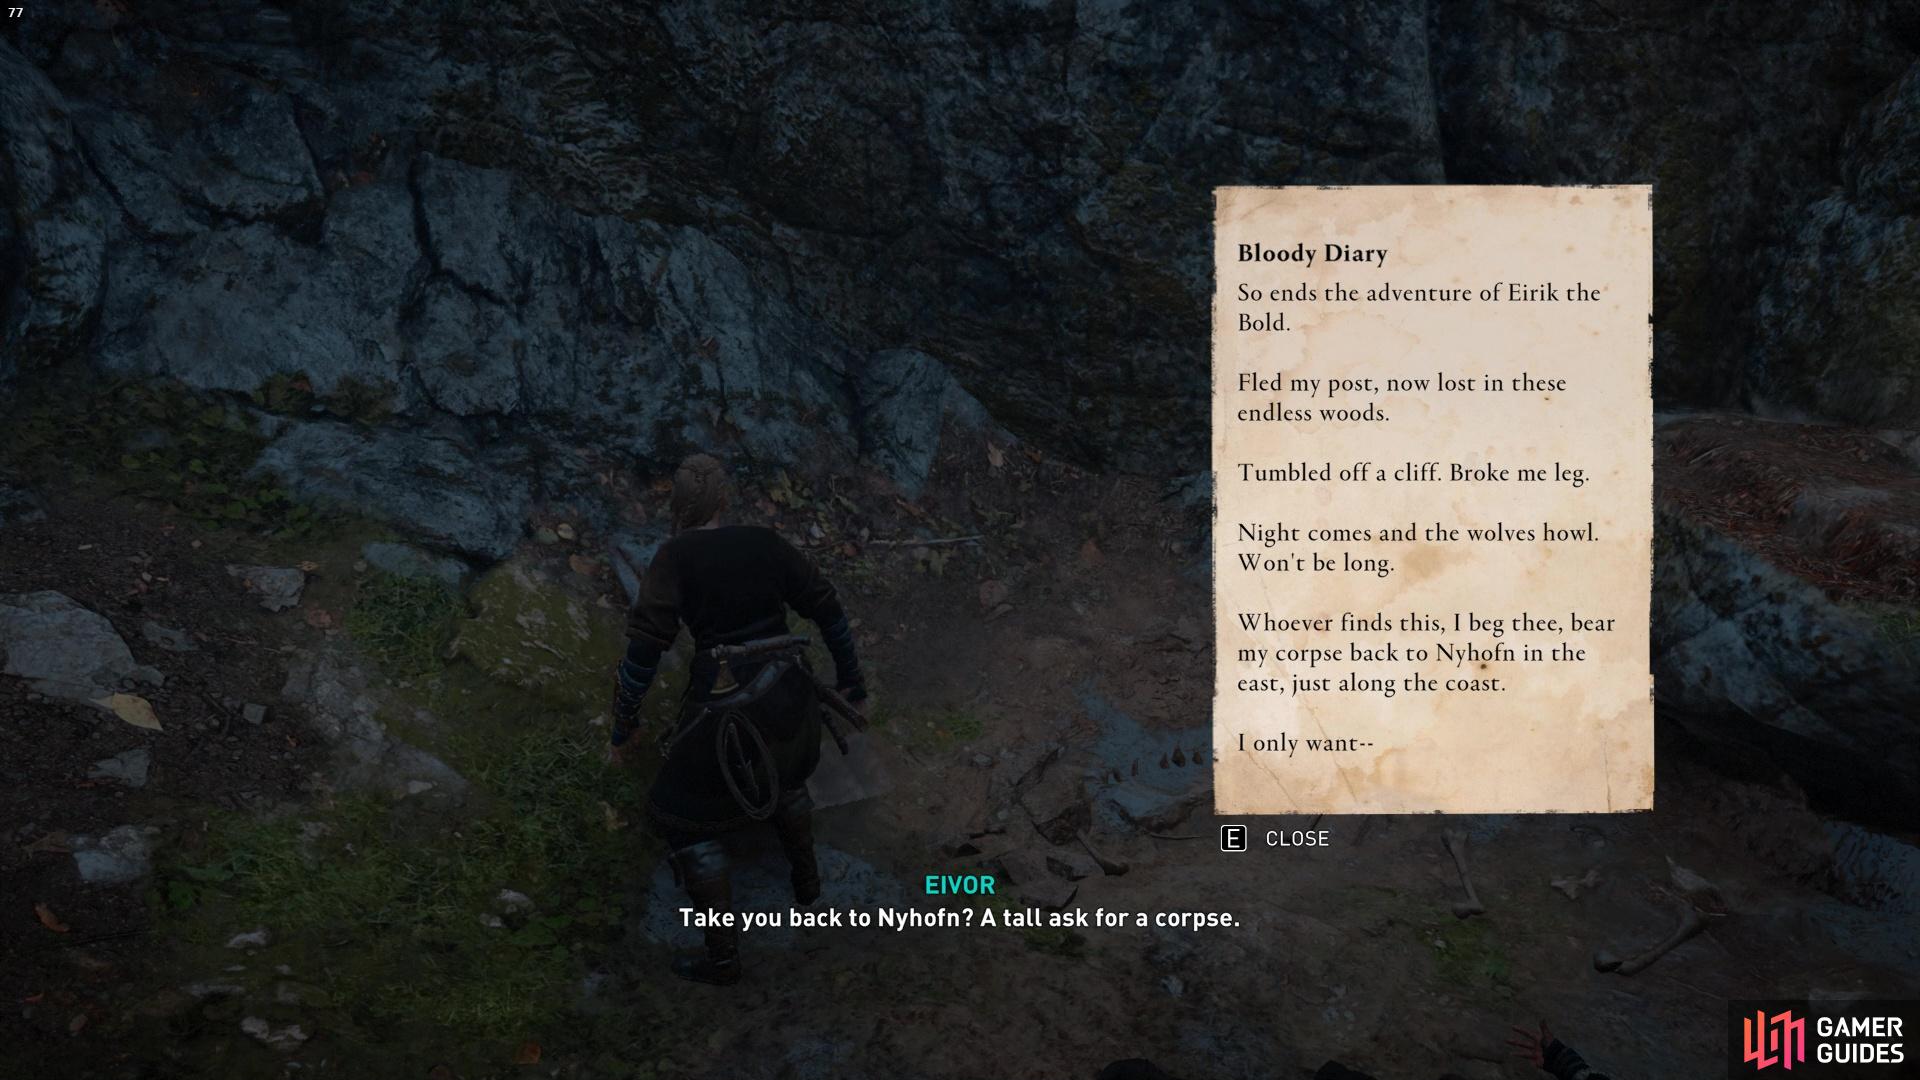 The dead mans letter will request that you return his body to Nyhofn